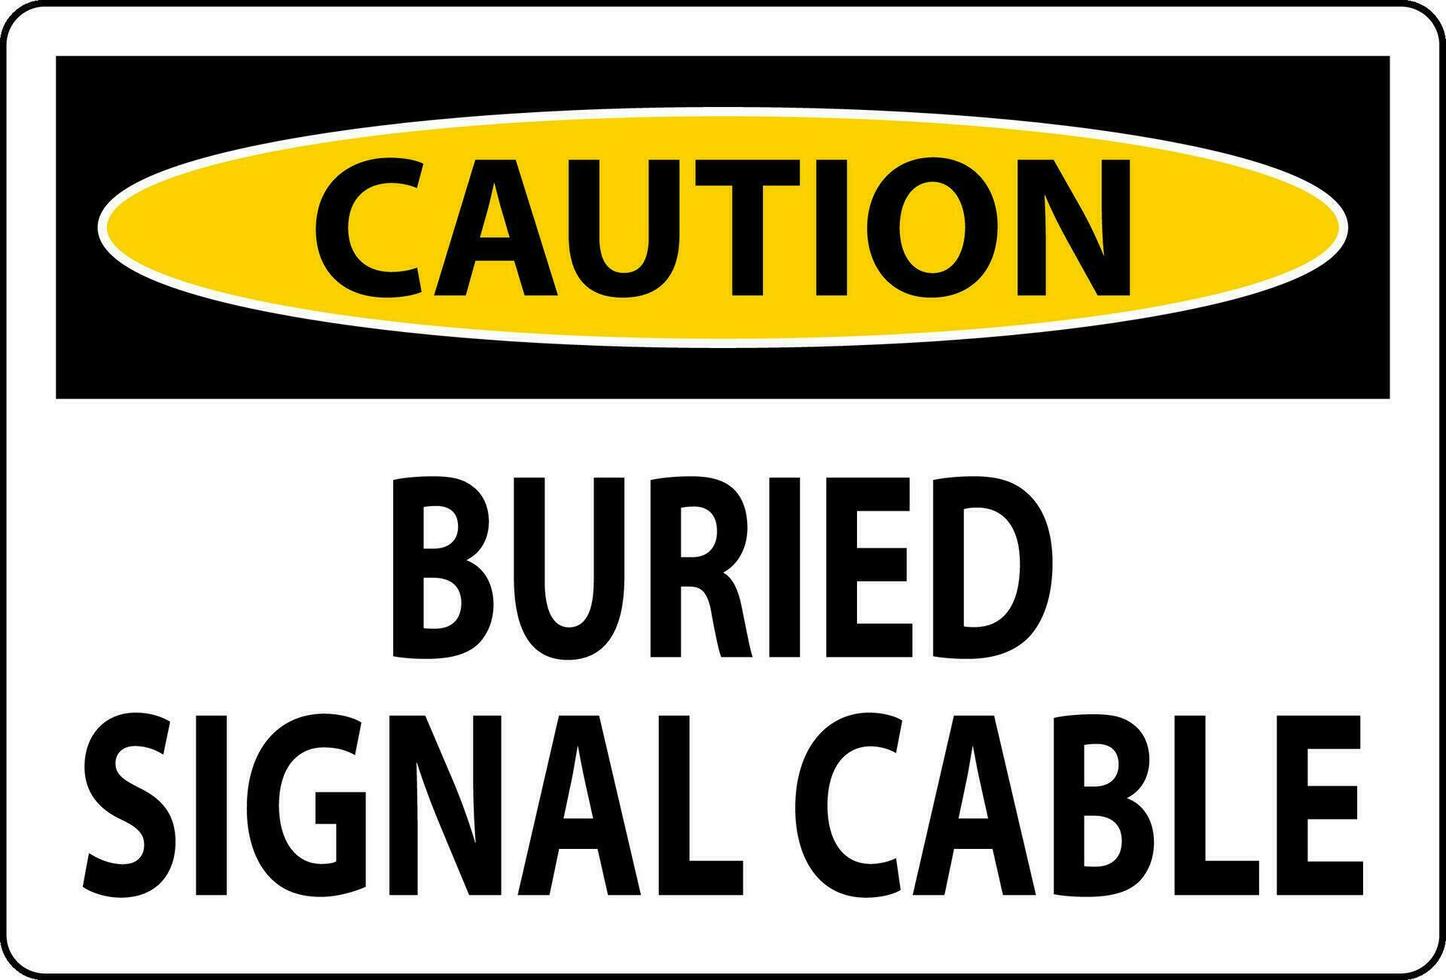 Caution Sign Buried Signal Cable On White Bacground vector